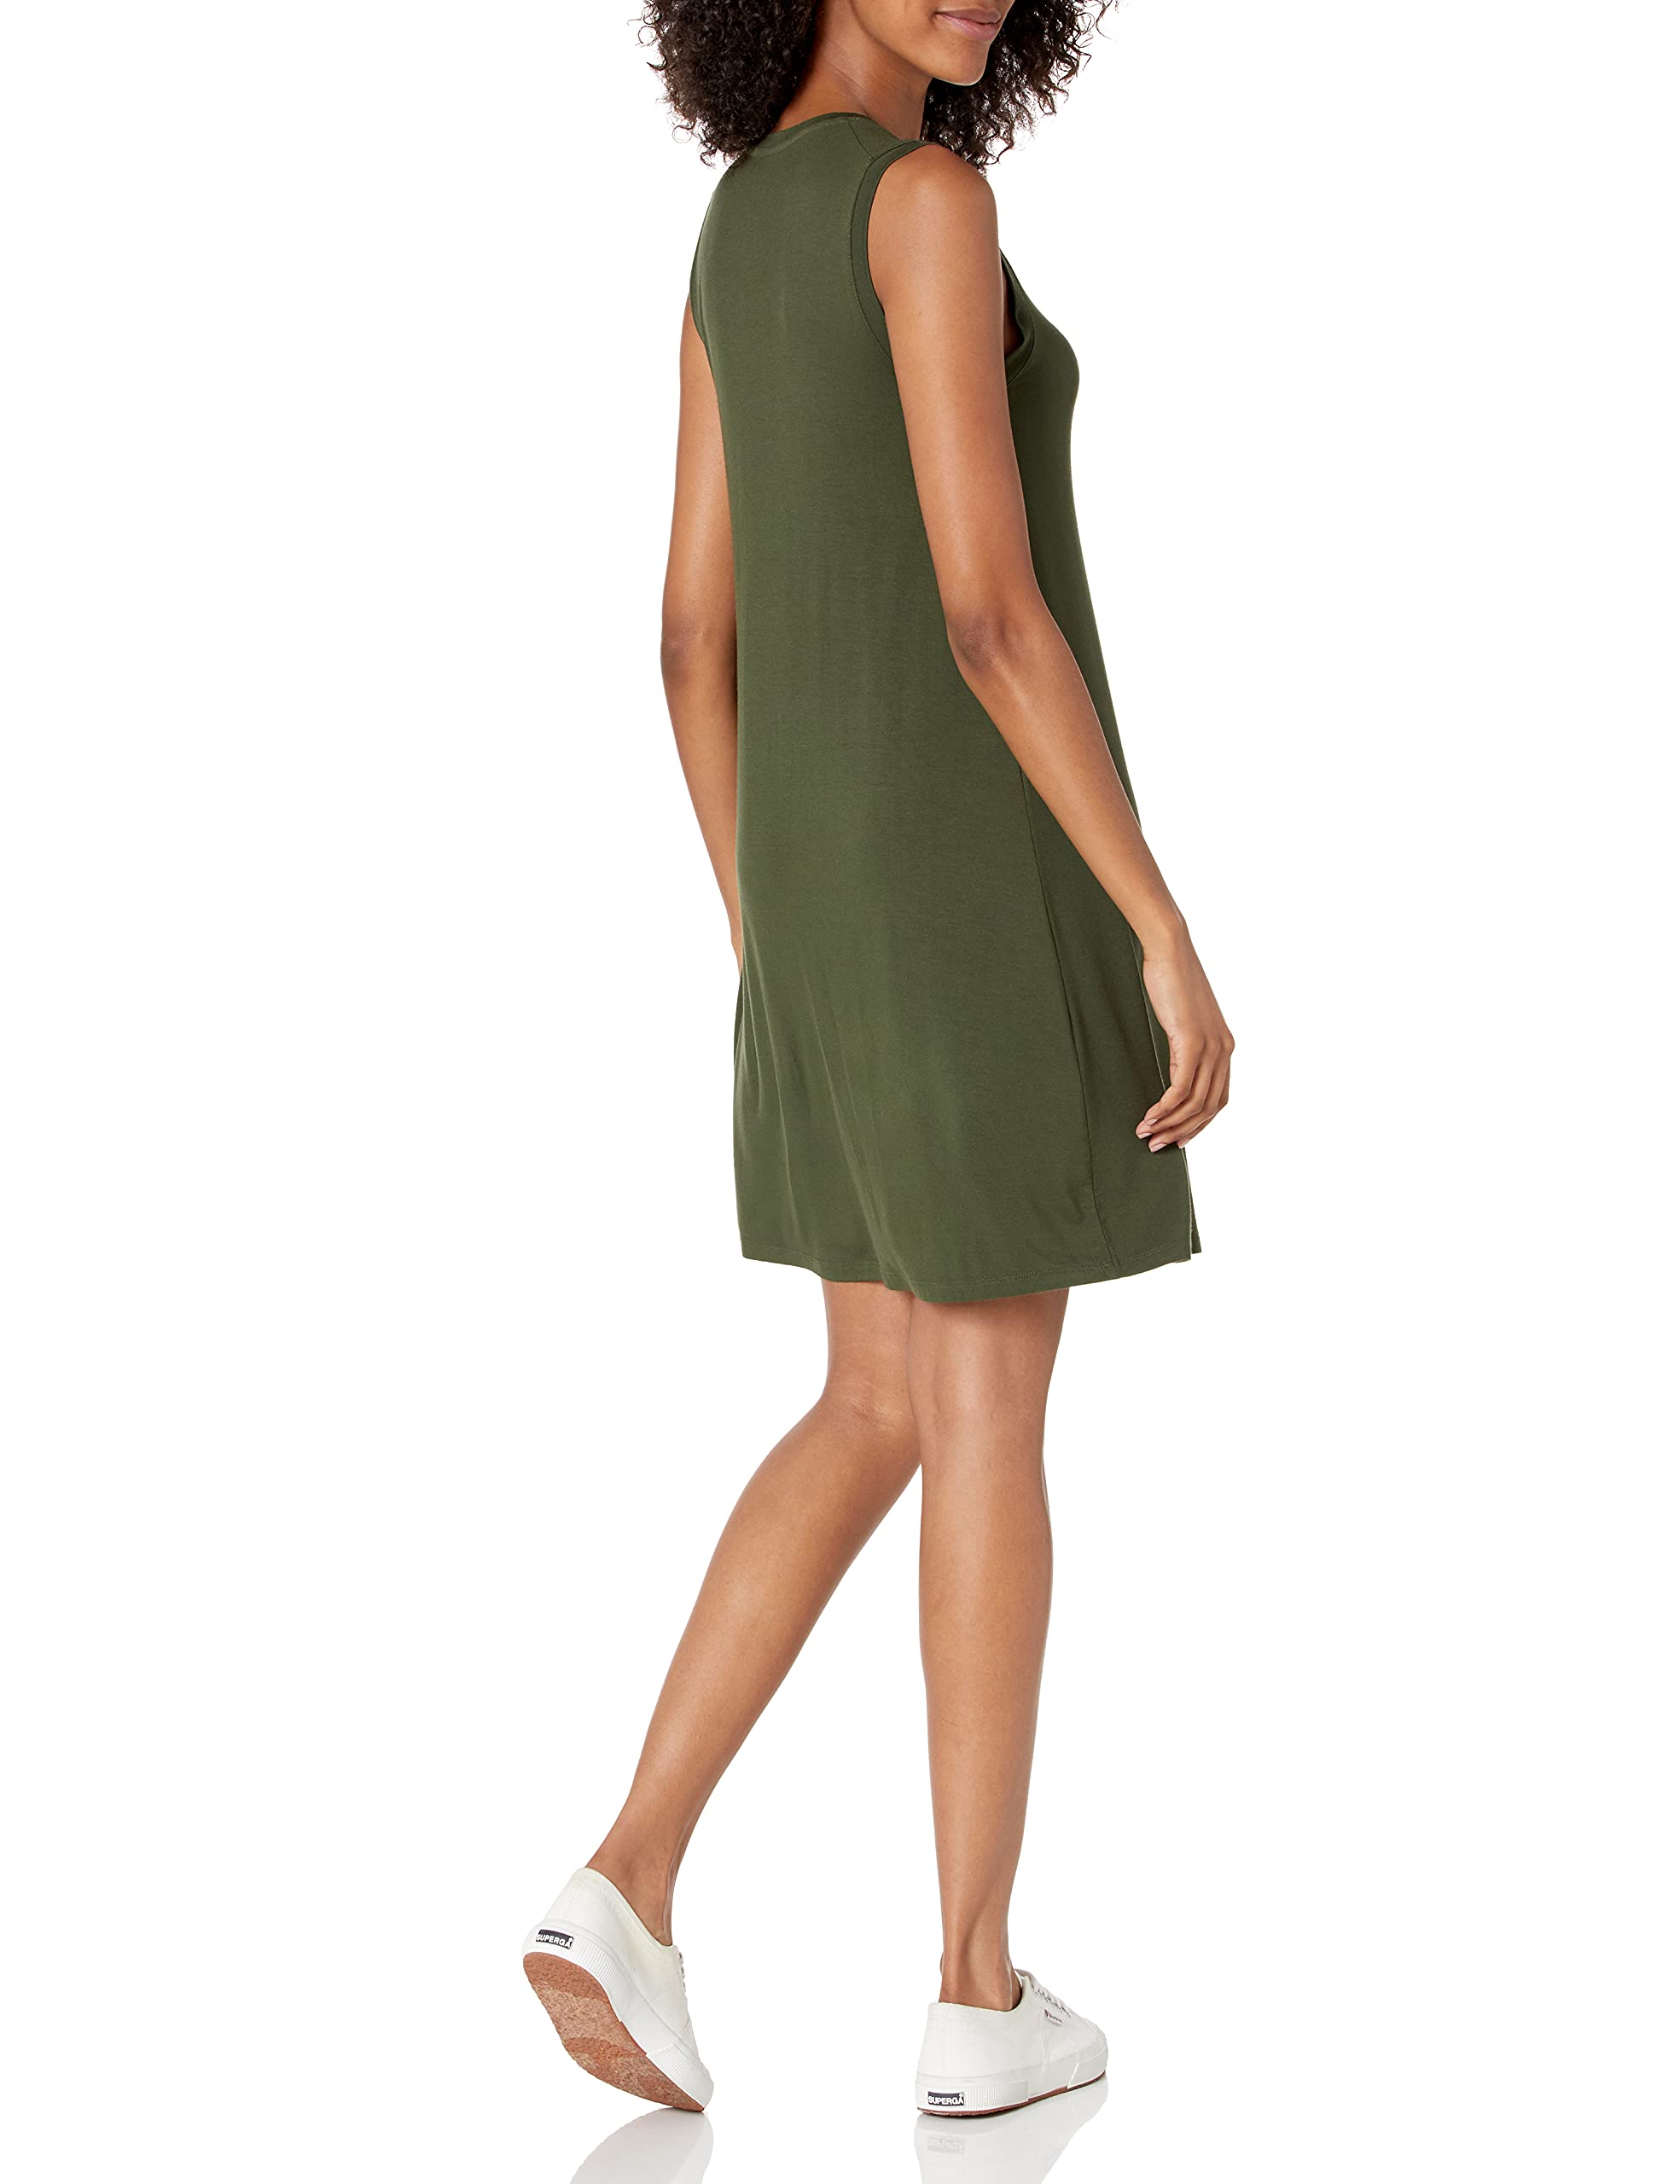 Amazon Essentials Women's Jersey Relaxed-Fit Muscle-Sleeve Swing Dress (Previously Daily Ritual)